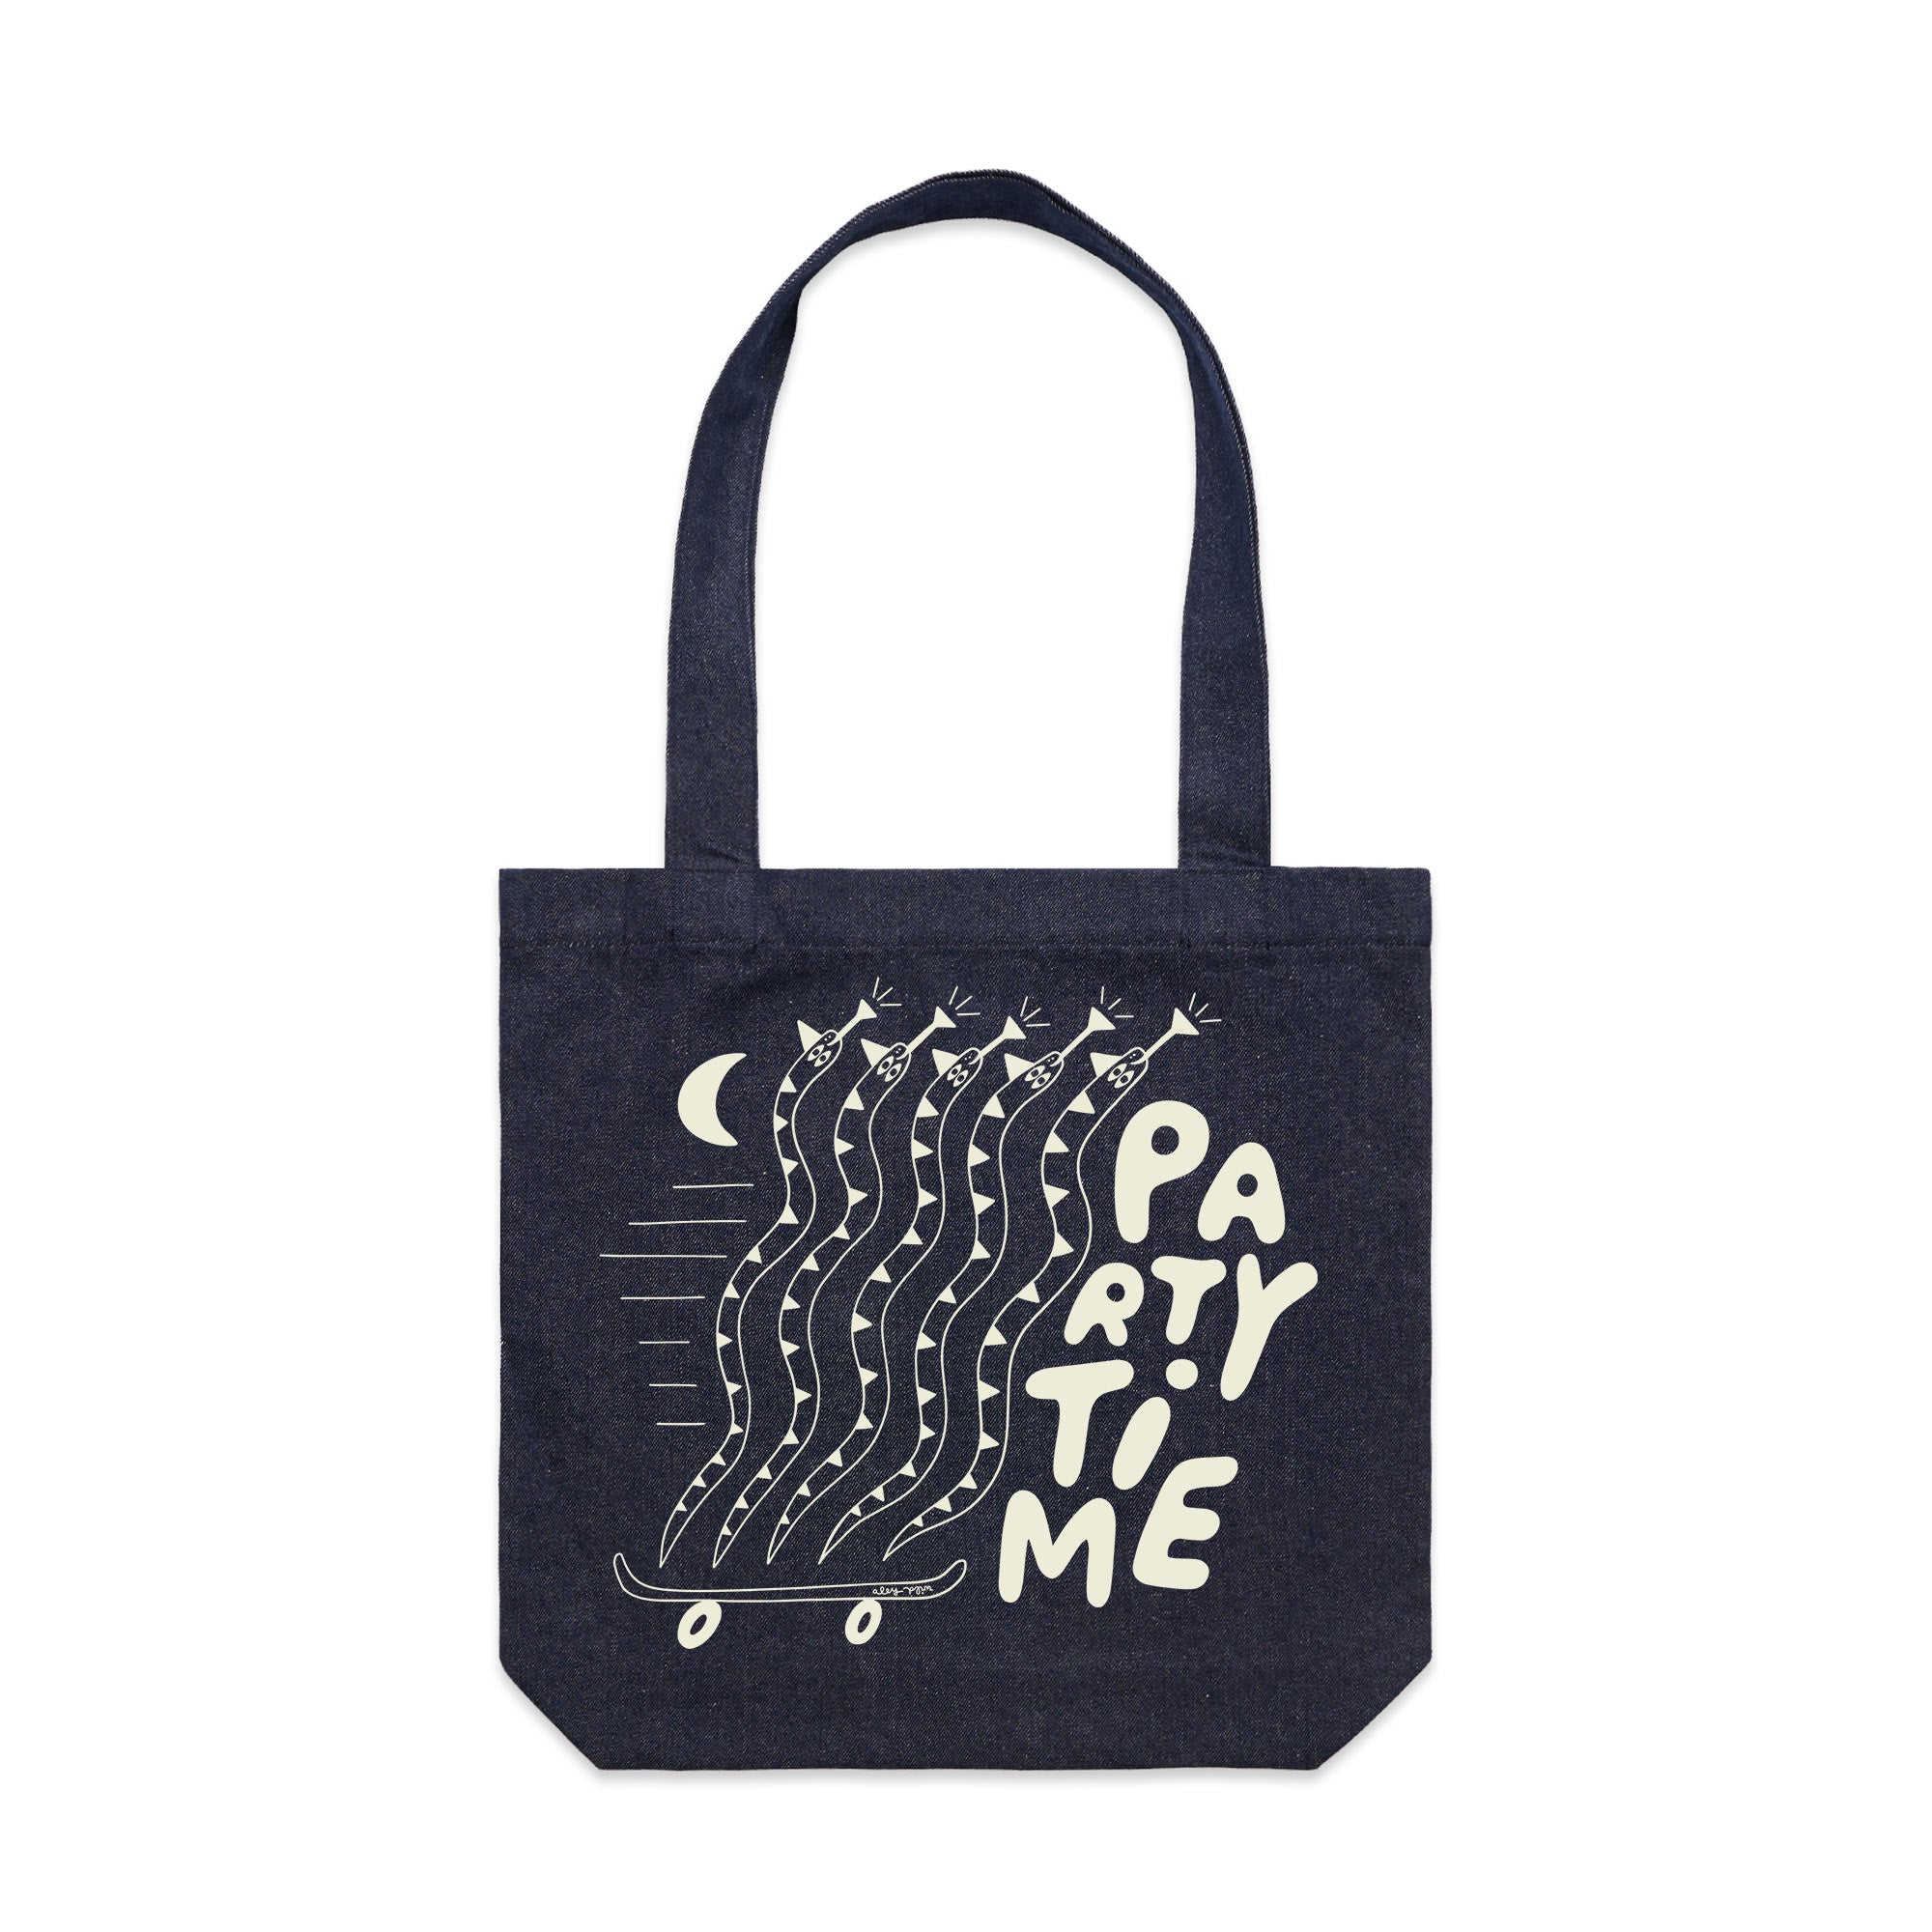 Party Time Tote